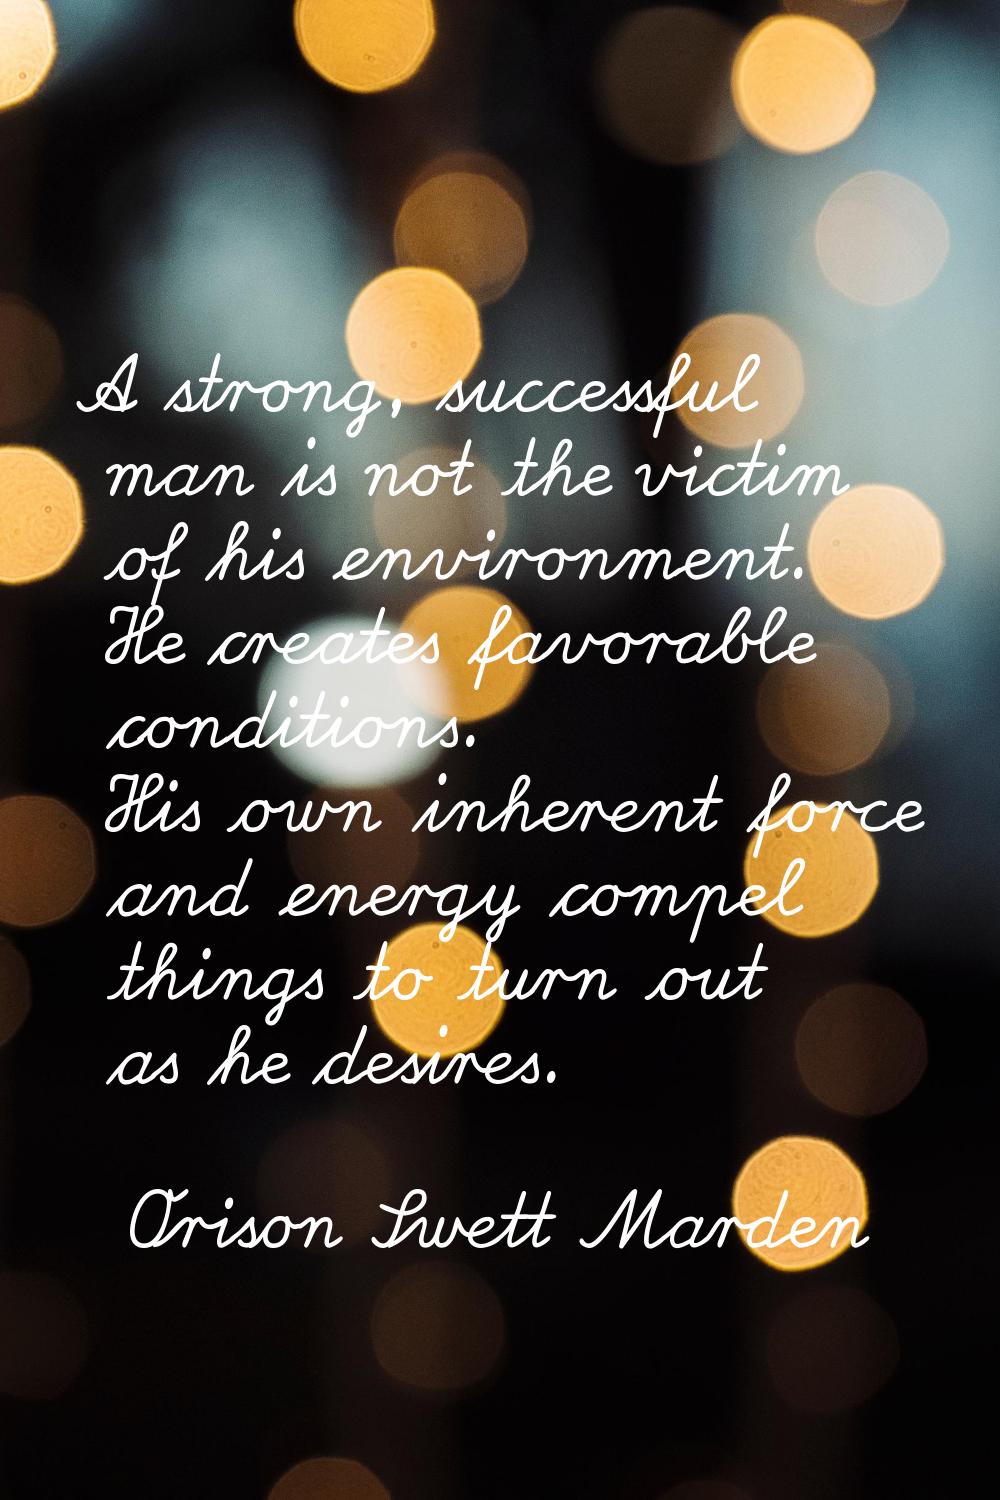 A strong, successful man is not the victim of his environment. He creates favorable conditions. His